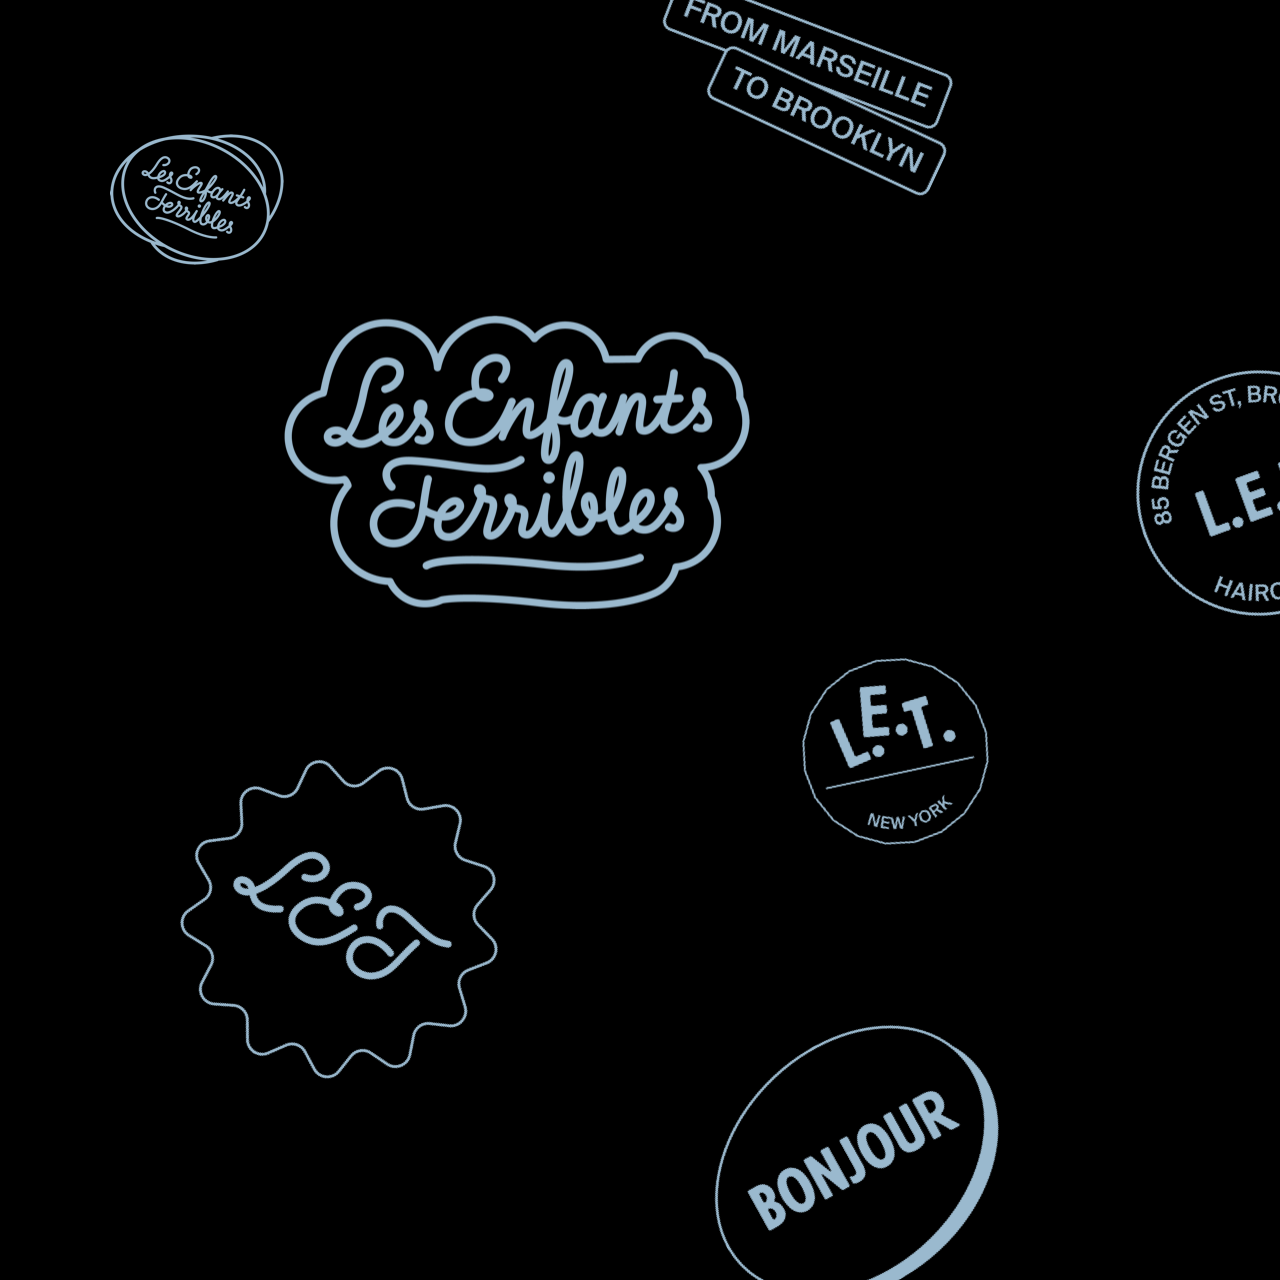 Logo seals and type design for Les Enfants Terribles, hairdressers in Brooklyn.